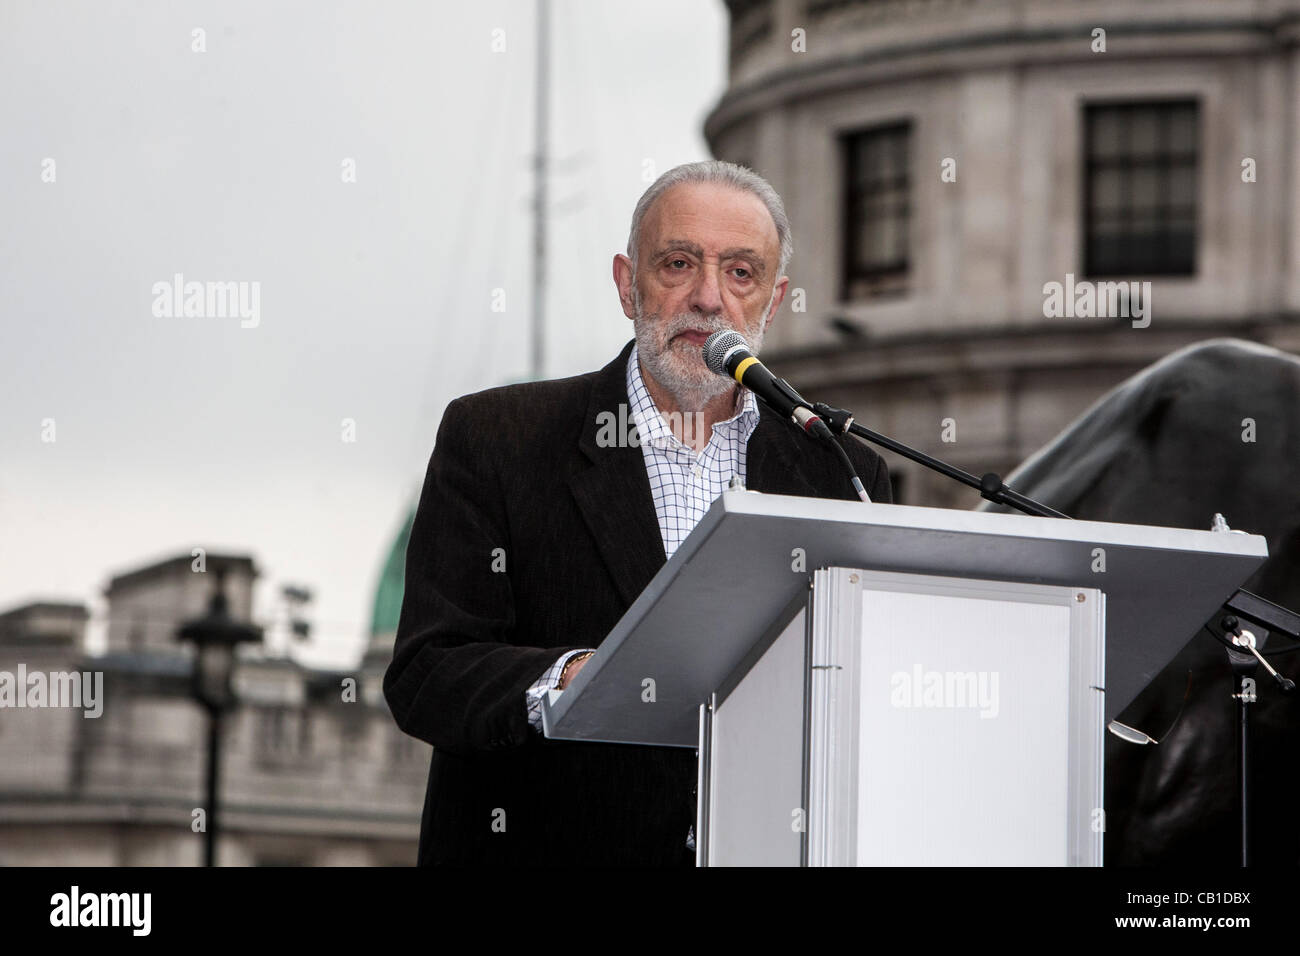 London, United Kingdom, 19/05/2012. Alan Weinberg, Conservative councillor for the London Borough of Redbridge, addressing the Tamil rally in Trafalgar Square, London Stock Photo